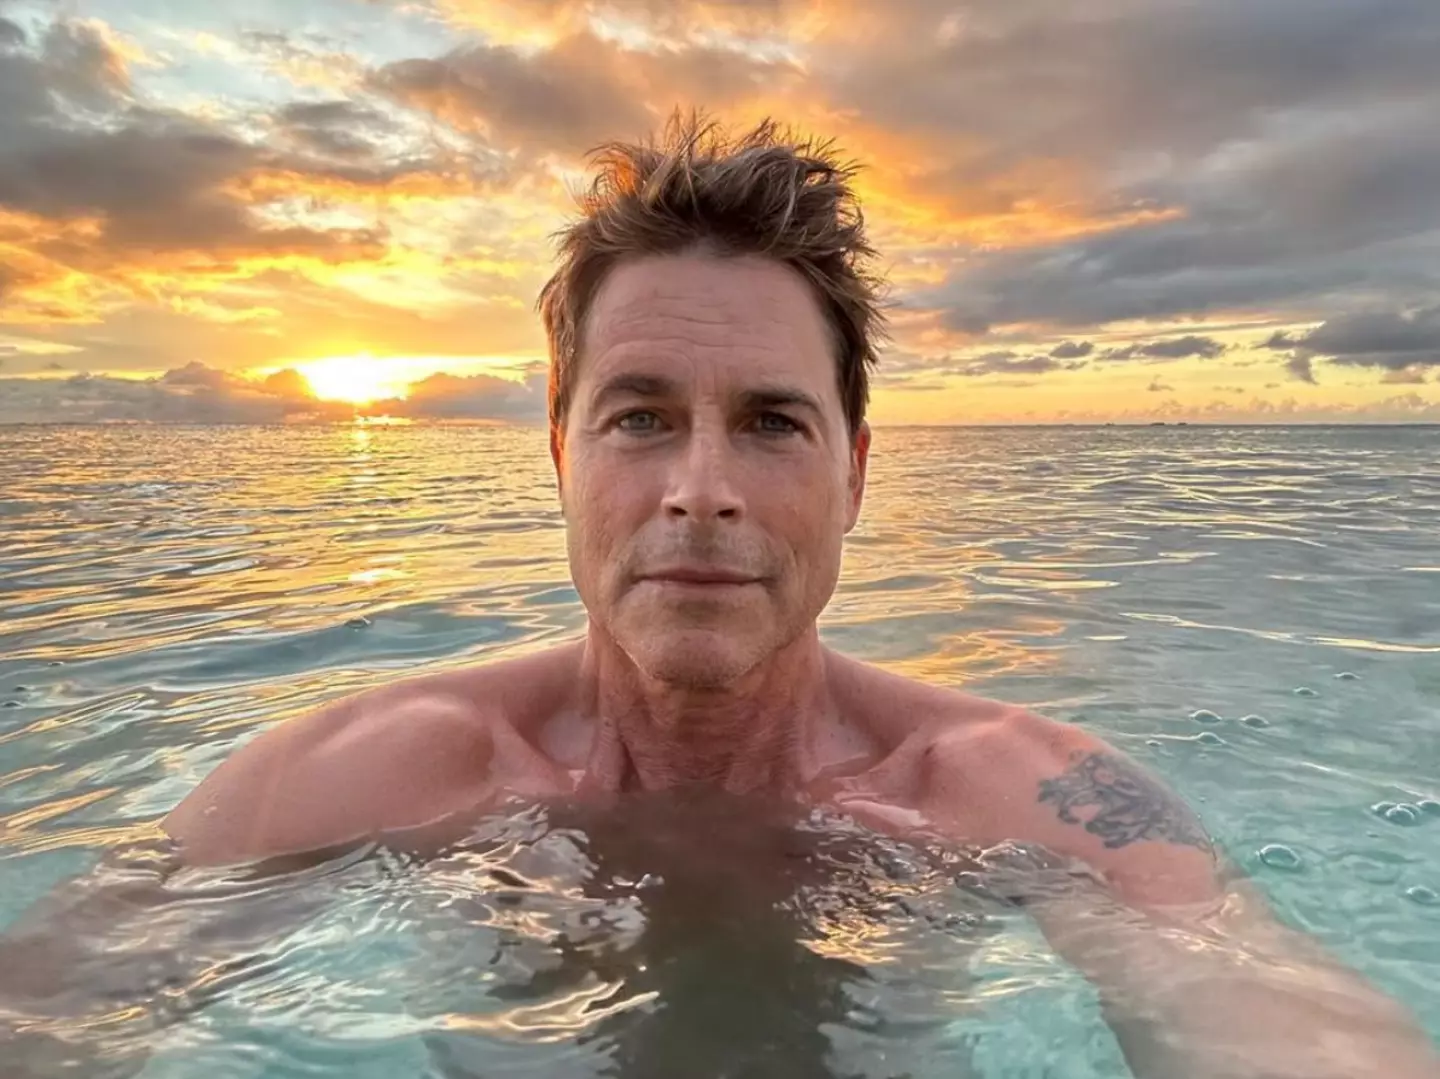 Rob Lowe is celebrating 33 years of sobriety by issuing a special thanks to his 'tribe'.